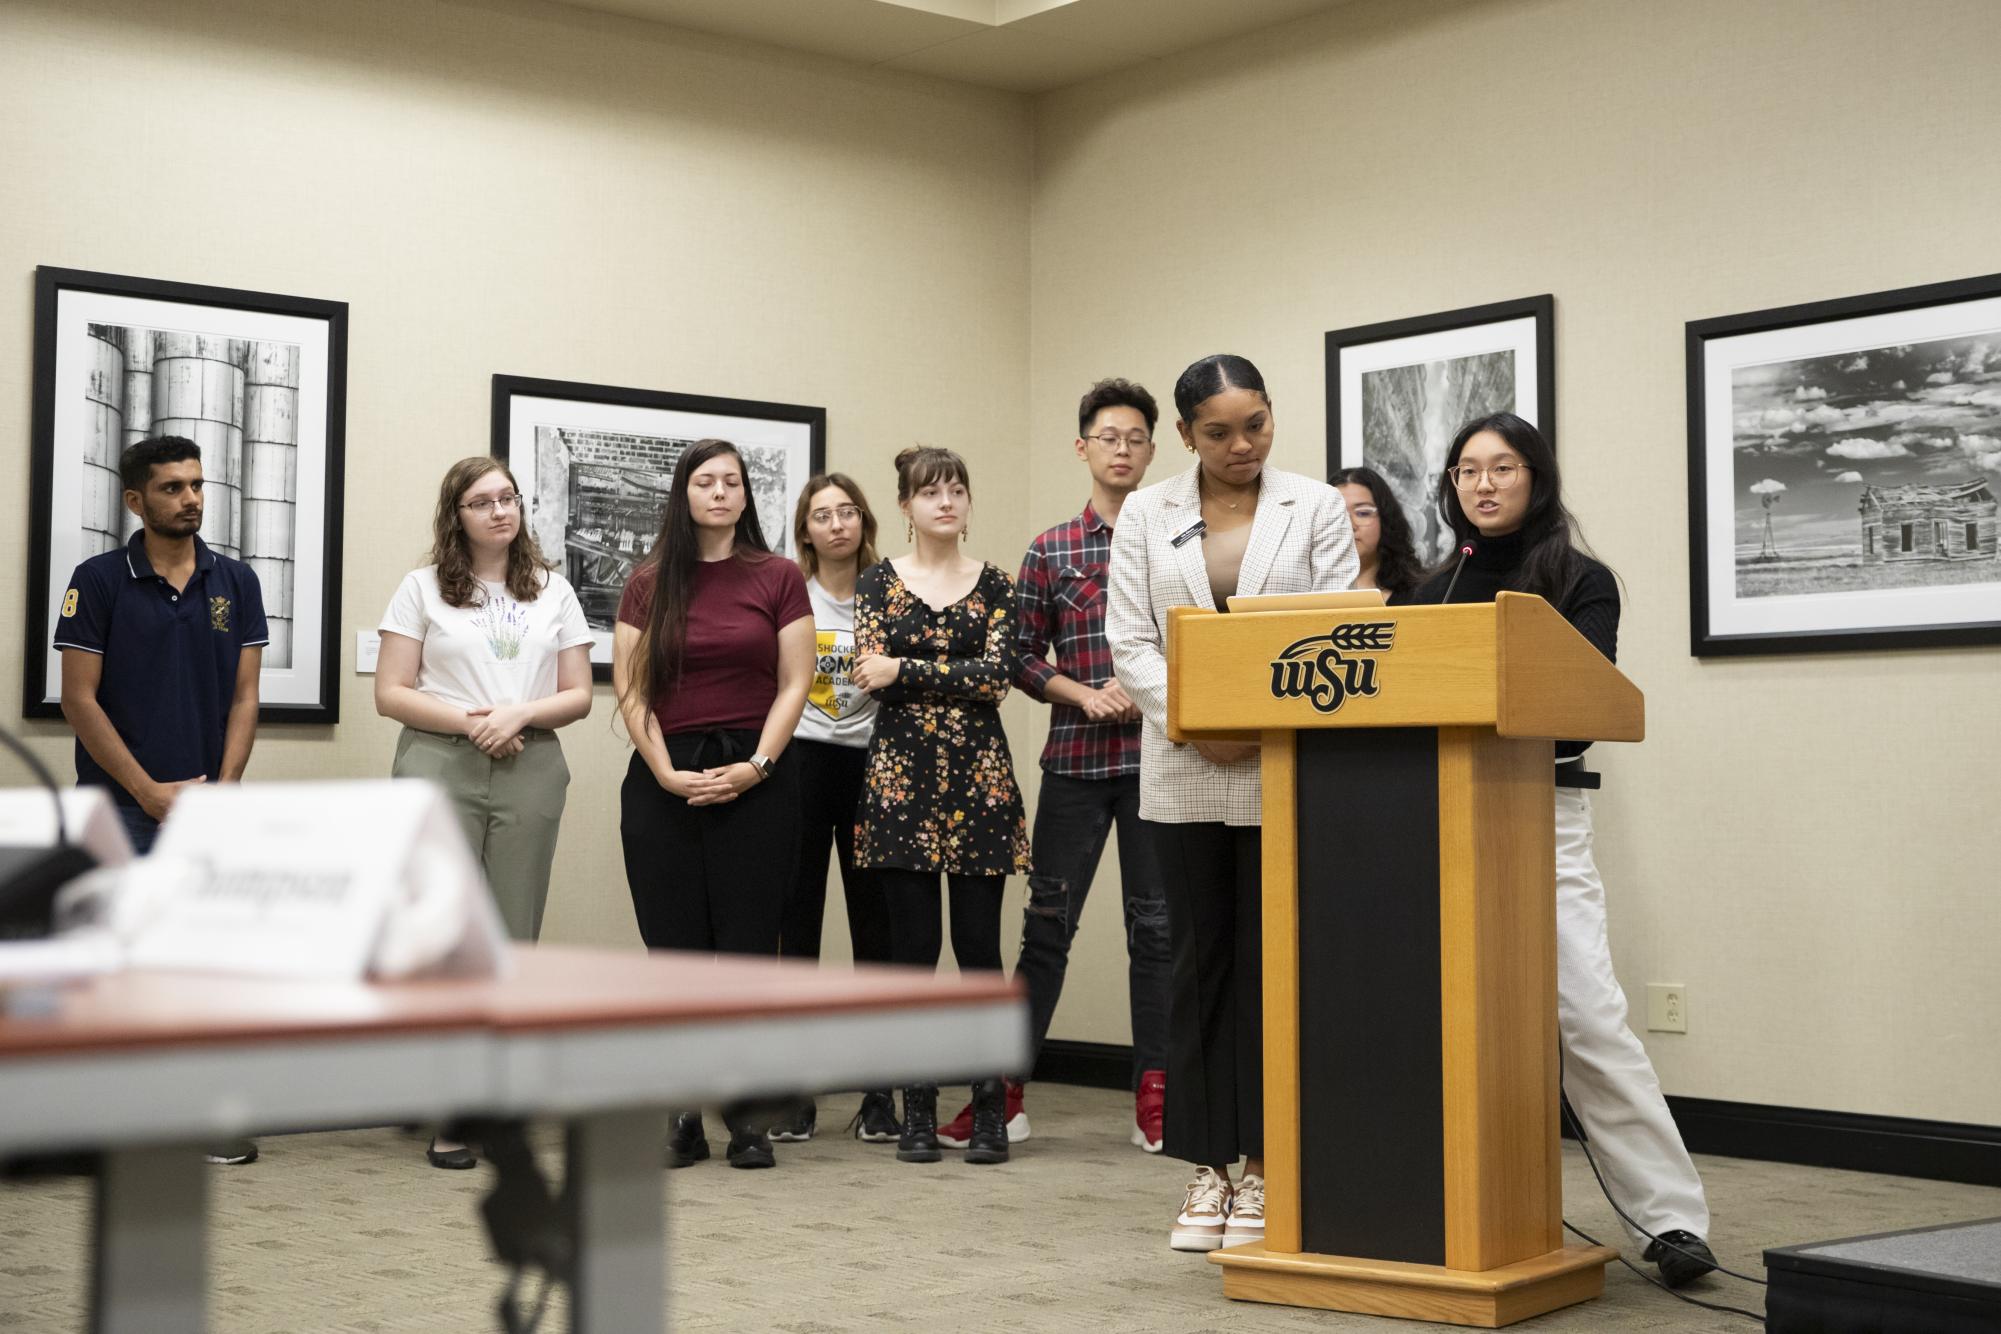 Flanked by members of student organizations, Student Body President Iris Okere and Student Body Treasurer Jia Wen Wang speak to senators at the Sept. 12 meeting about an emergency funding act.